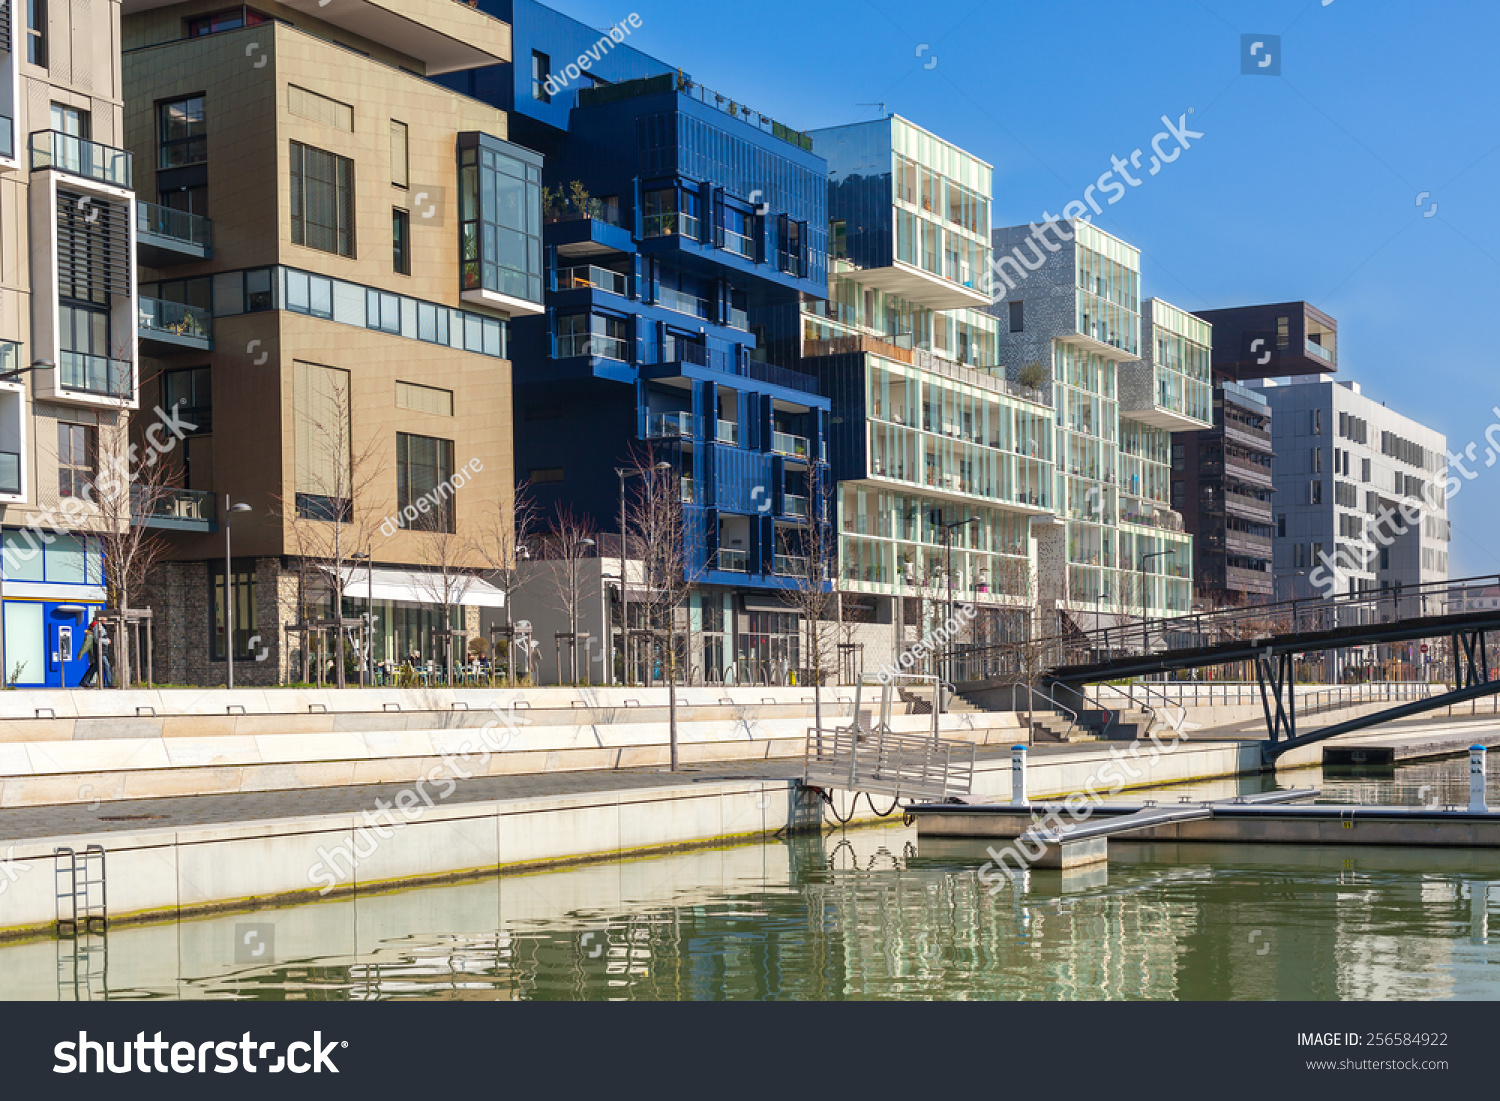 FRANCE, LYON - FEBRUARY 19: The Confluence District in Lyon, France on February 19, 2013. New district with an modern architecture in the place of the old port 